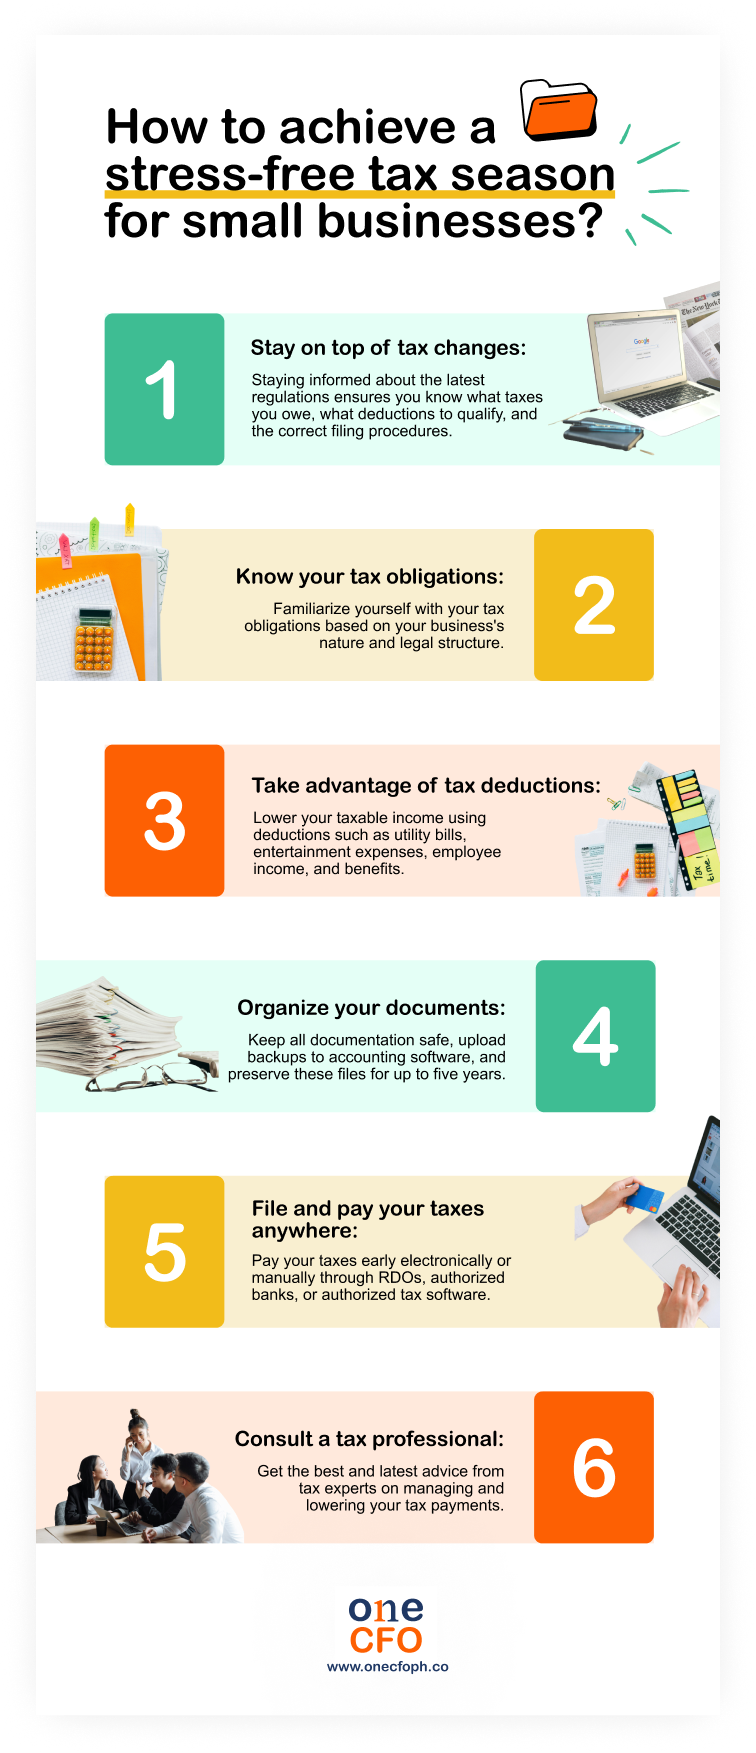 Tax tips for small businesses for a stress-free tax season